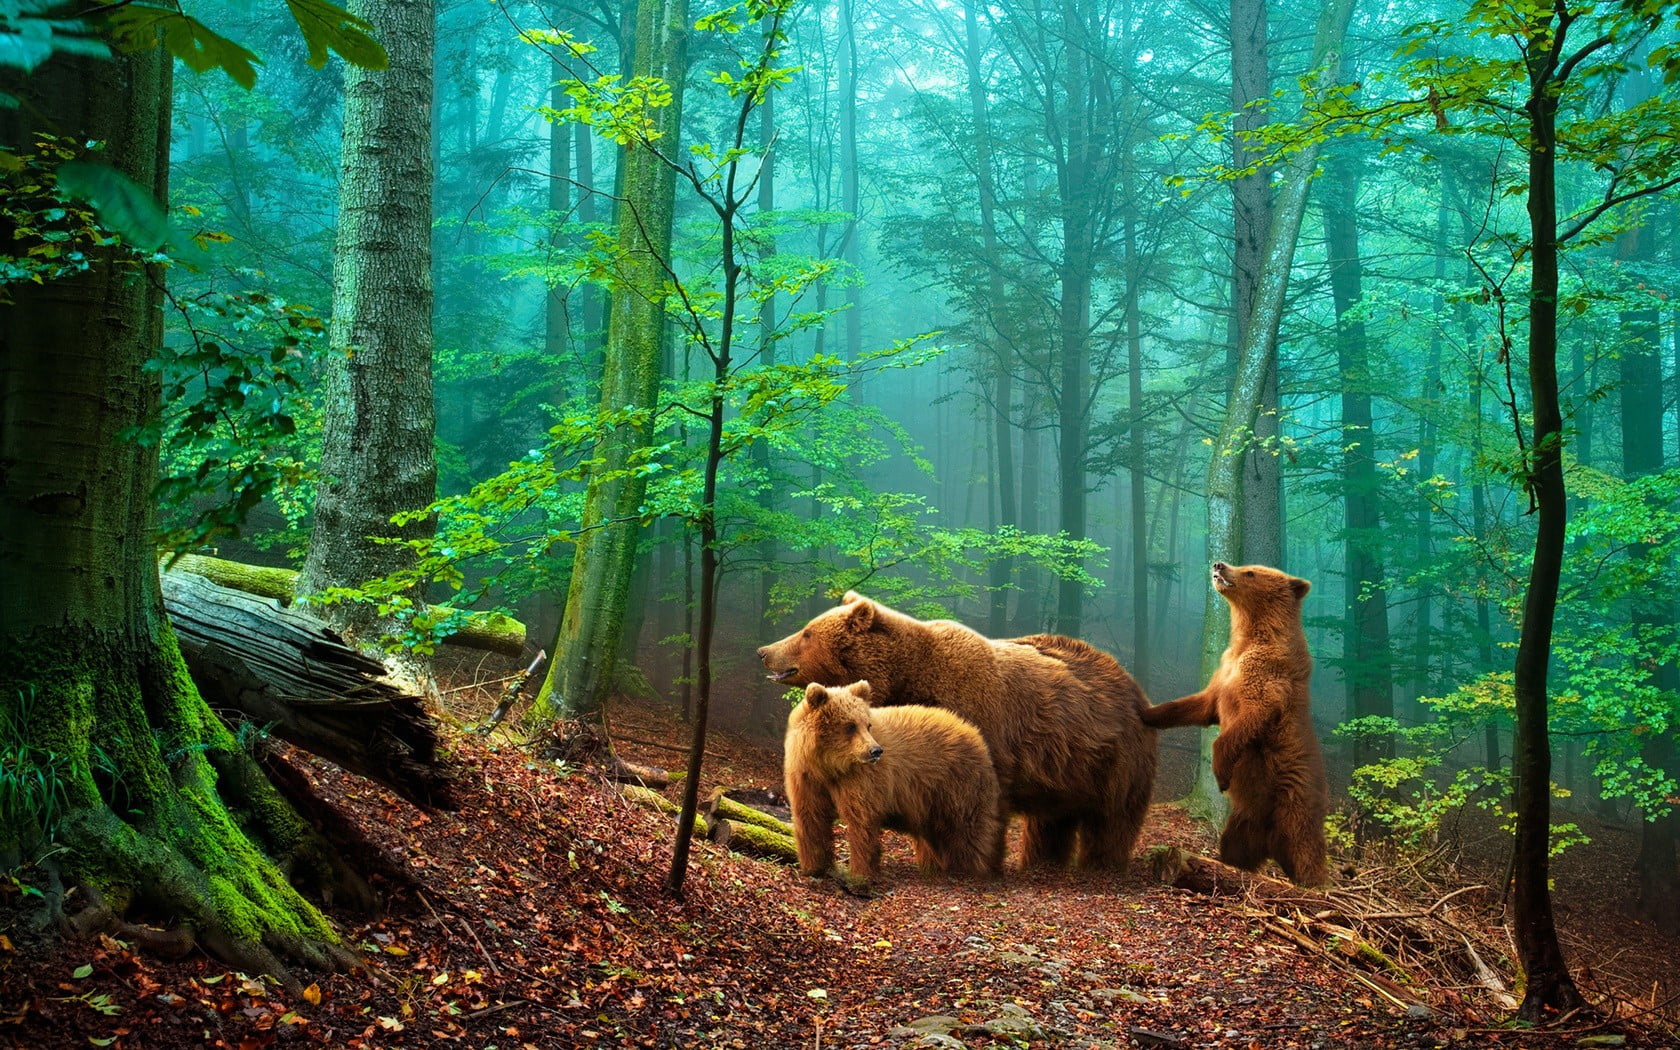 three grizzly bears in forest digital wallpaper, bears, animals